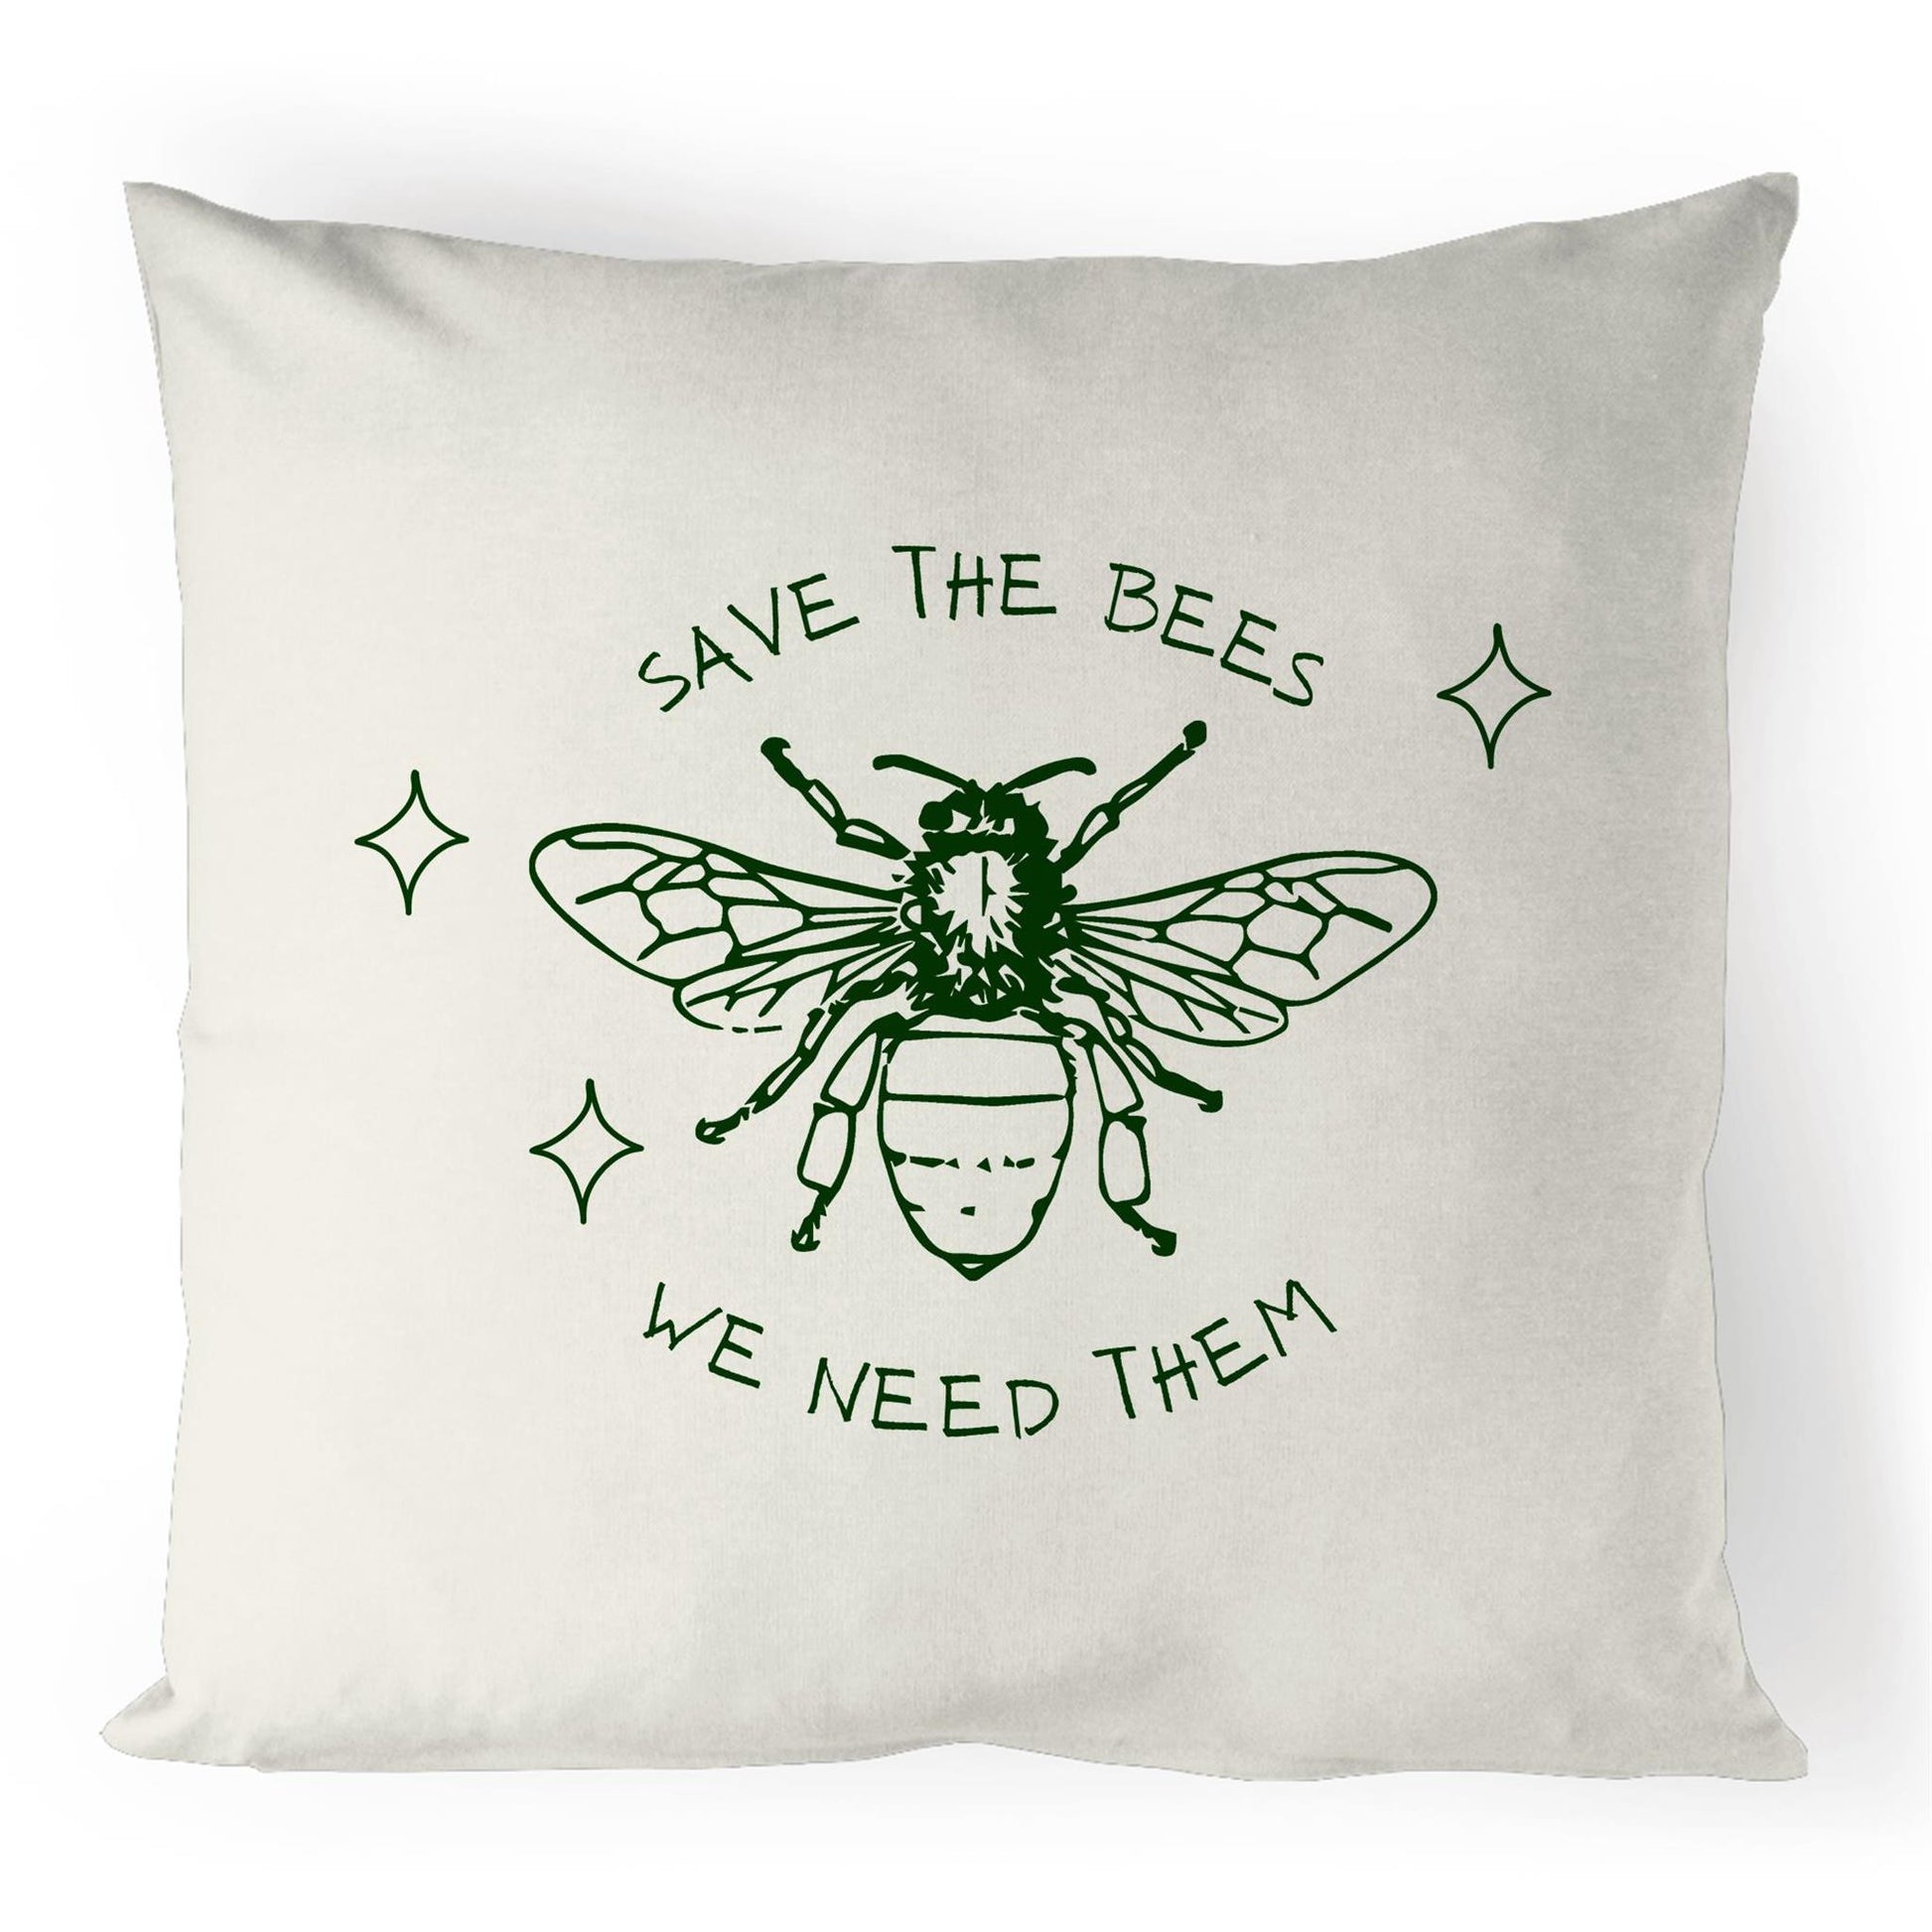 Save The Bees - 100% Linen Cushion Cover Default Title Linen Cushion Cover